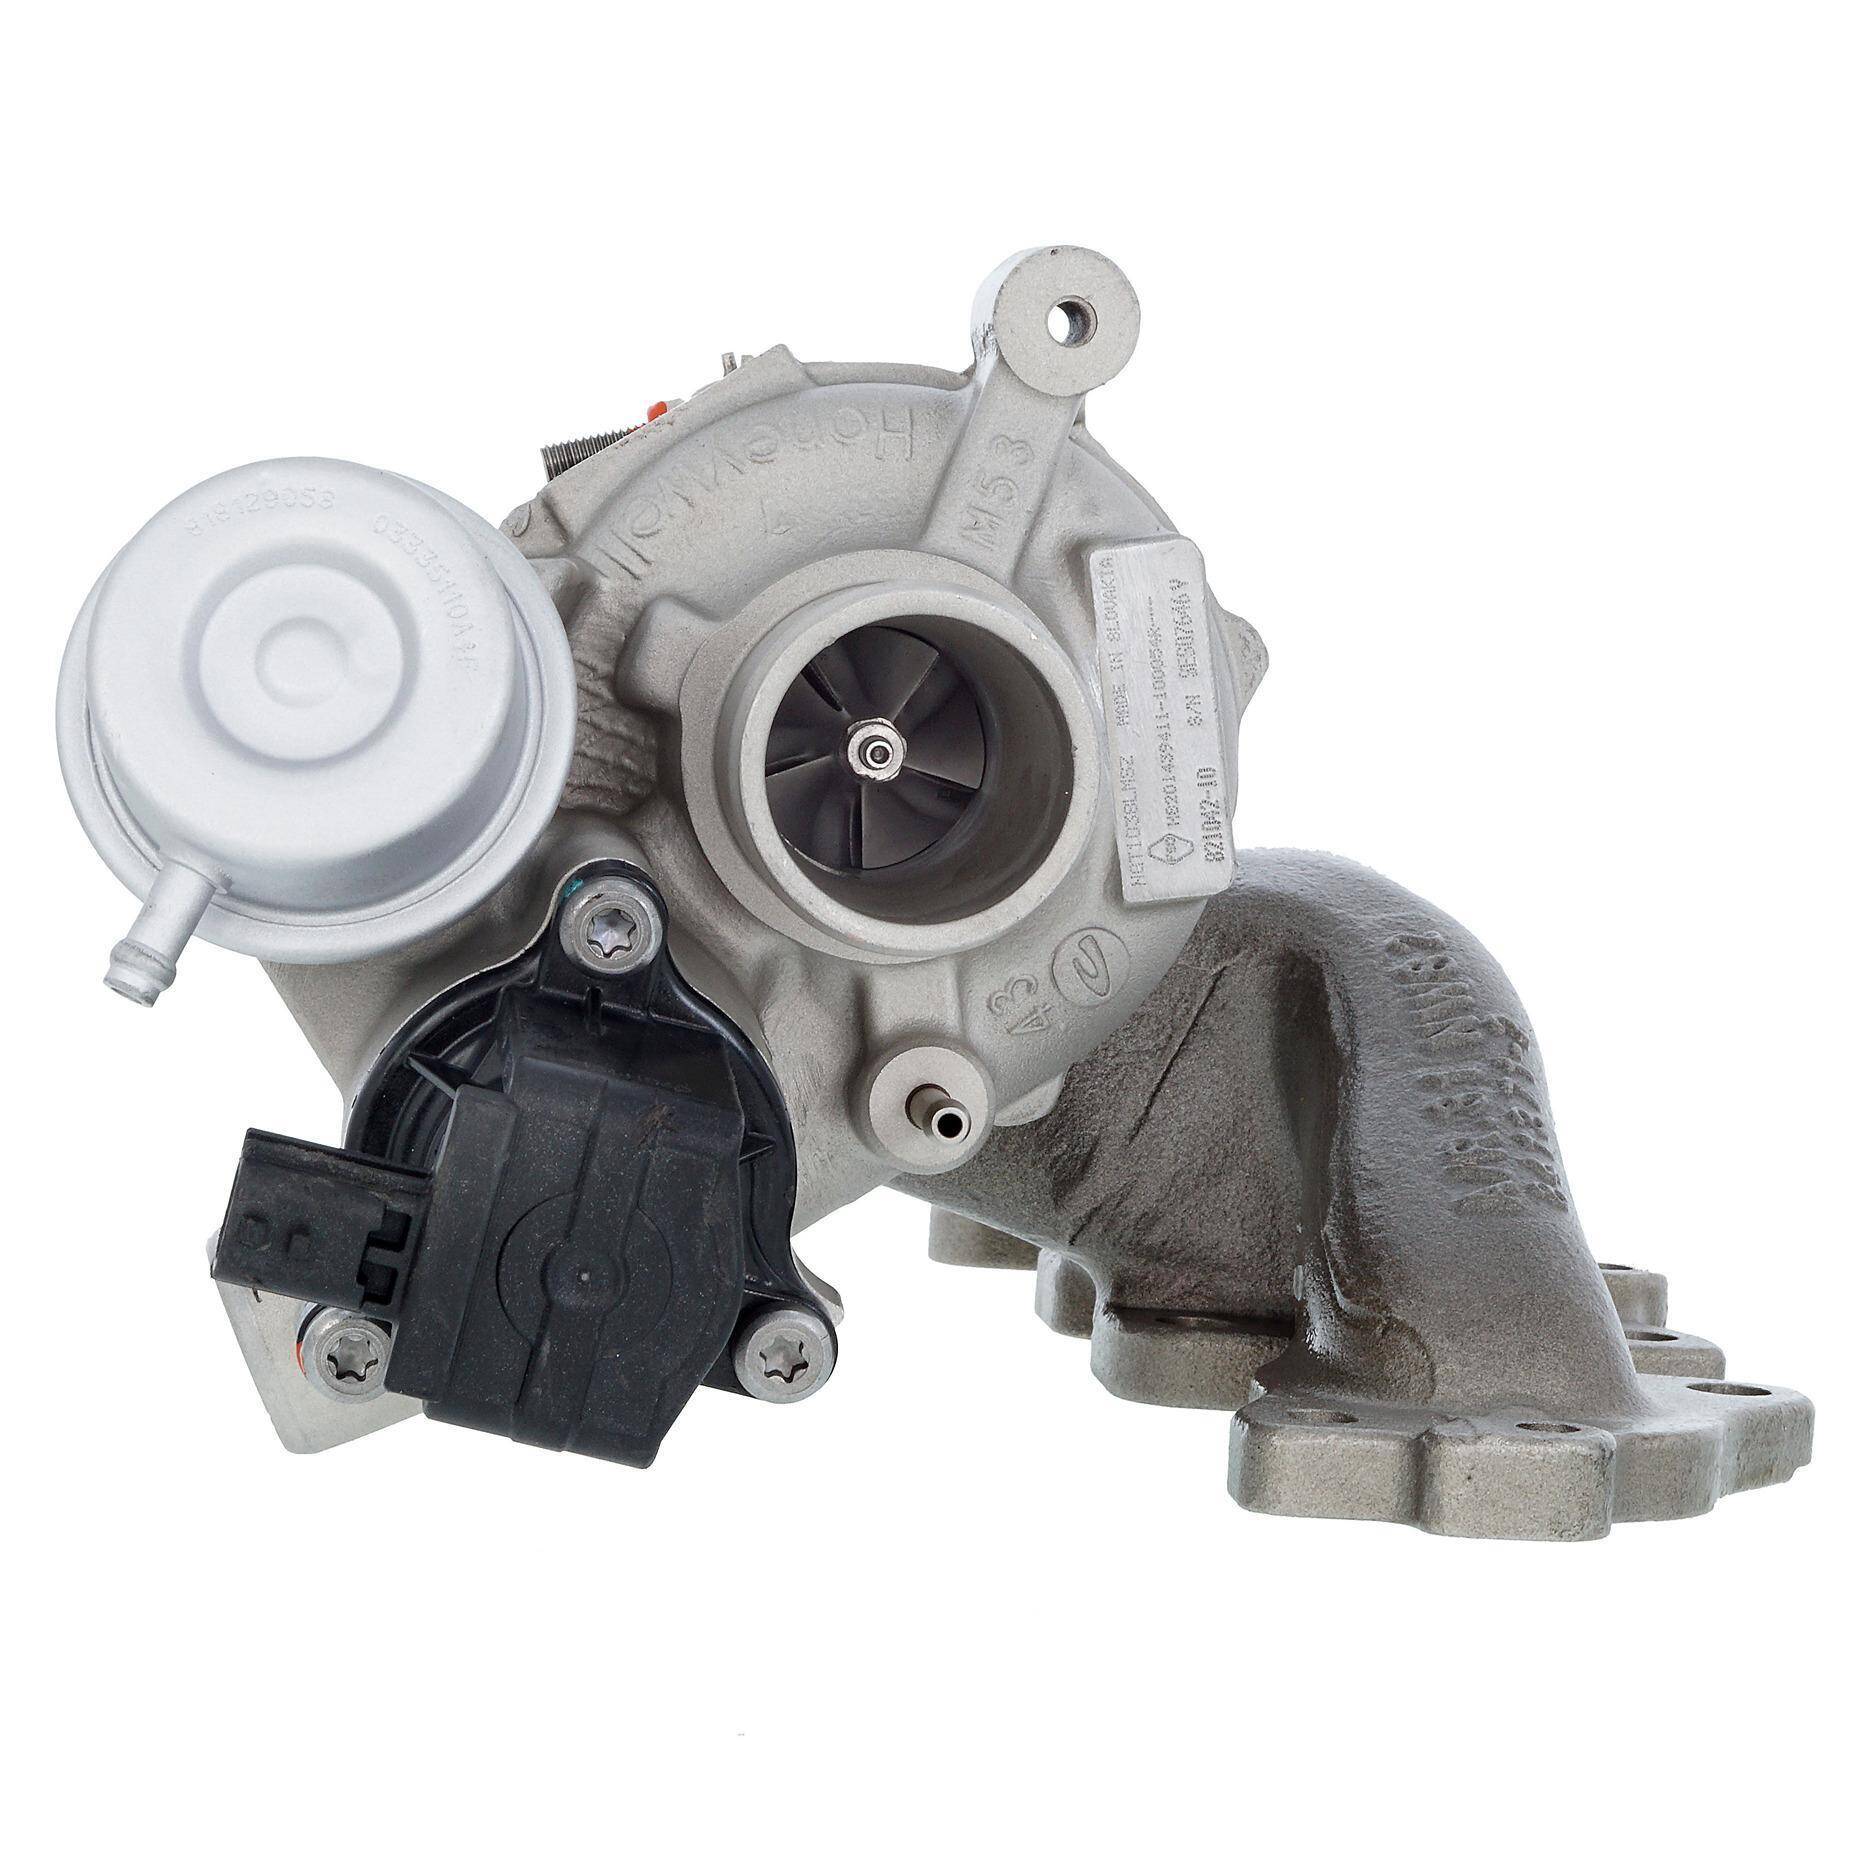 TURBOCHARGER TURBO REMANUFACTURED 821042-0010 144100054R -0010